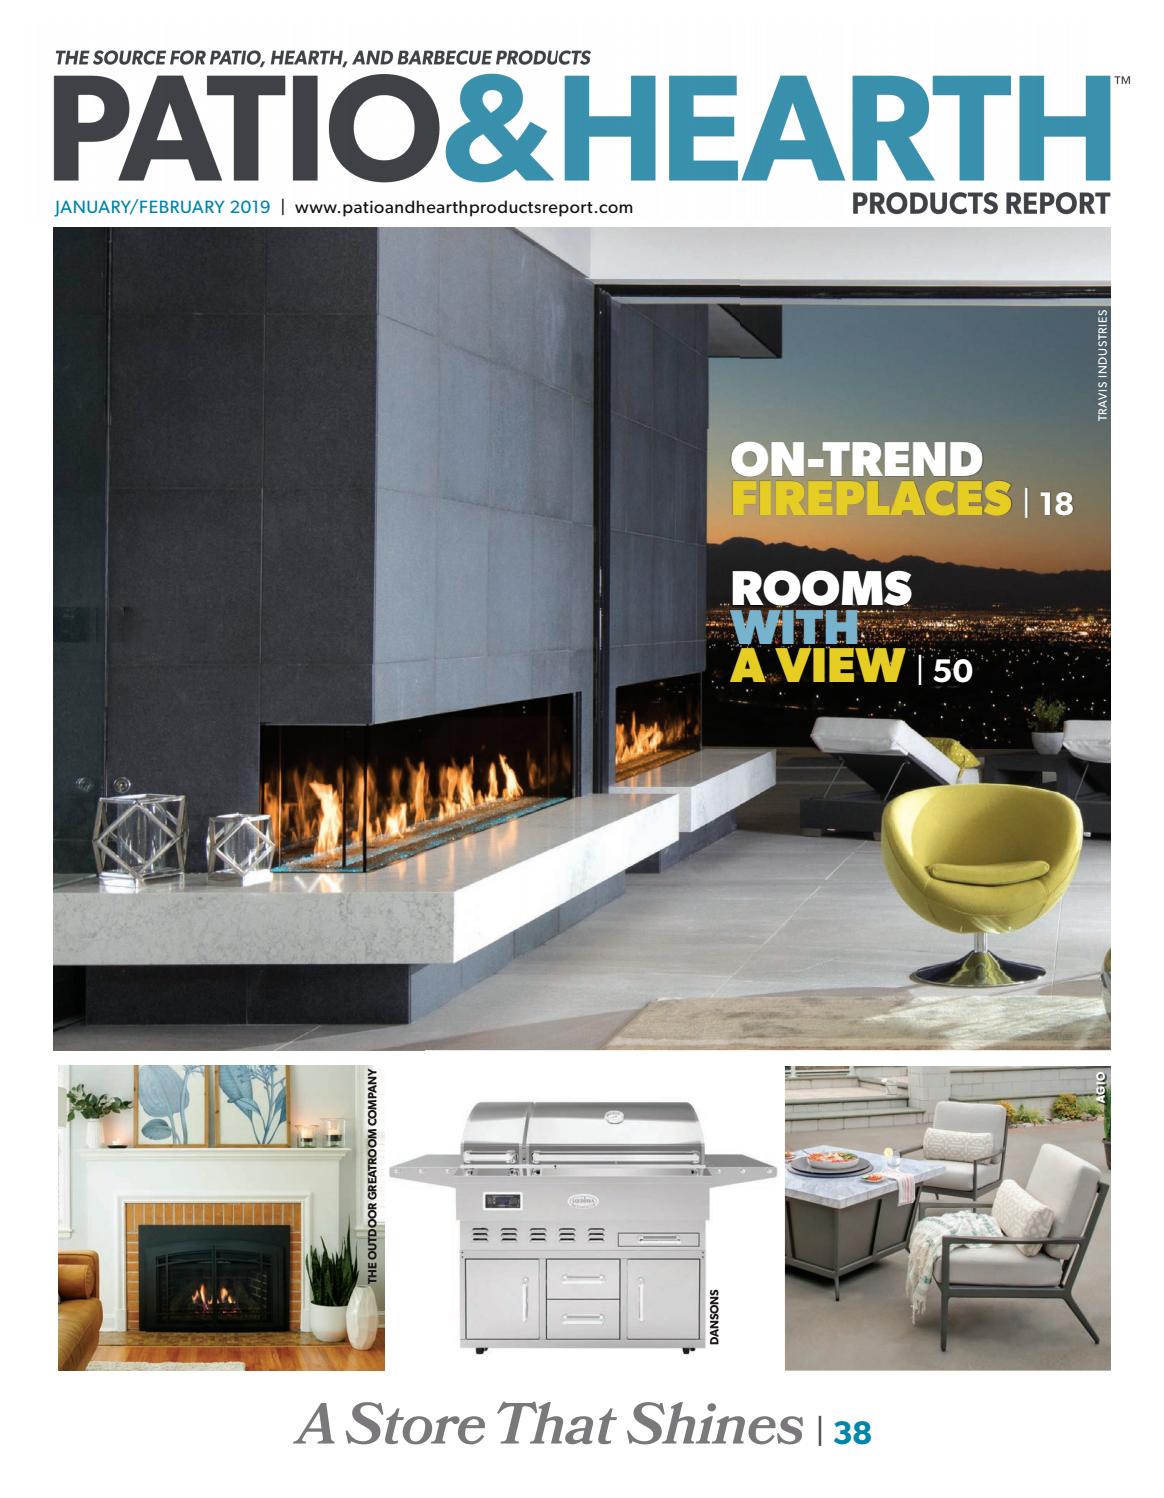 Fireplace Xtrordinair 864 Luxury Patio &amp; Hearth Products Report January February 2019 by